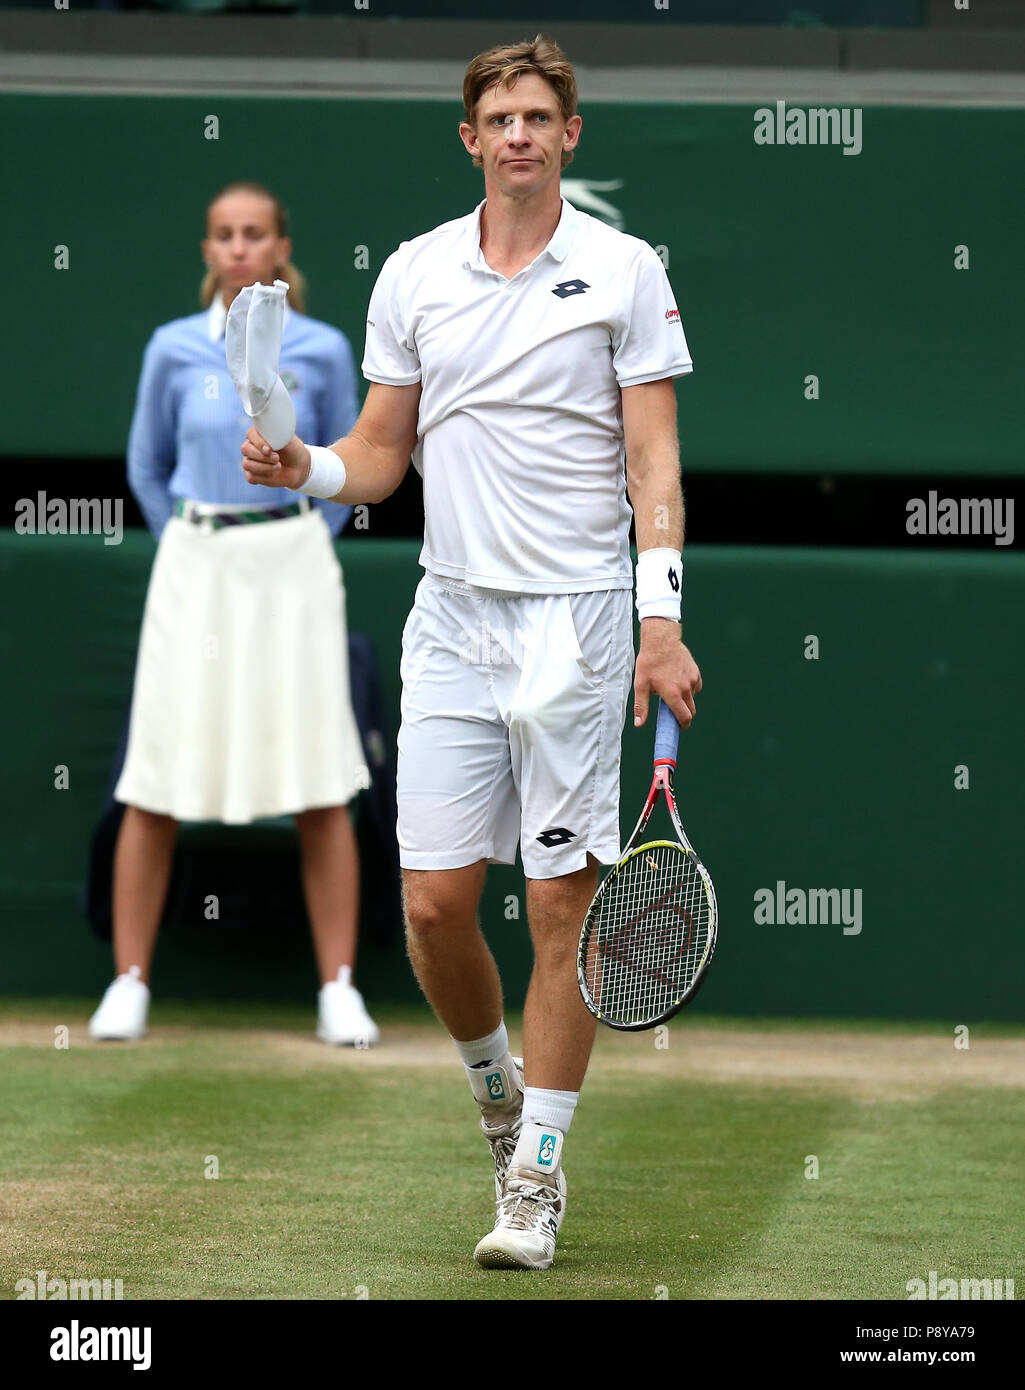 South African eighth seed Kevin Anderson celebrates having reached his first Wimbledon final, beating American ninth seed John Isner 7-6 (8/6) 6-7 (5/7) 6-7 (9/11) 6-4 26-24 in the longest semi-final in the tournament's history on day eleven of the Wimbledon Championships at the All England Lawn Tennis and Croquet Club, Wimbledon. PRESS ASSOCIATION Photo. Picture date: Friday July 13, 2018. See PA story TENNIS Wimbledon. Photo credit should read: Steven Paston/PA Wire. RESTRICTIONS: . No commercial use without prior written consent of the AELTC. Still image use only - no moving images to Stock Photo